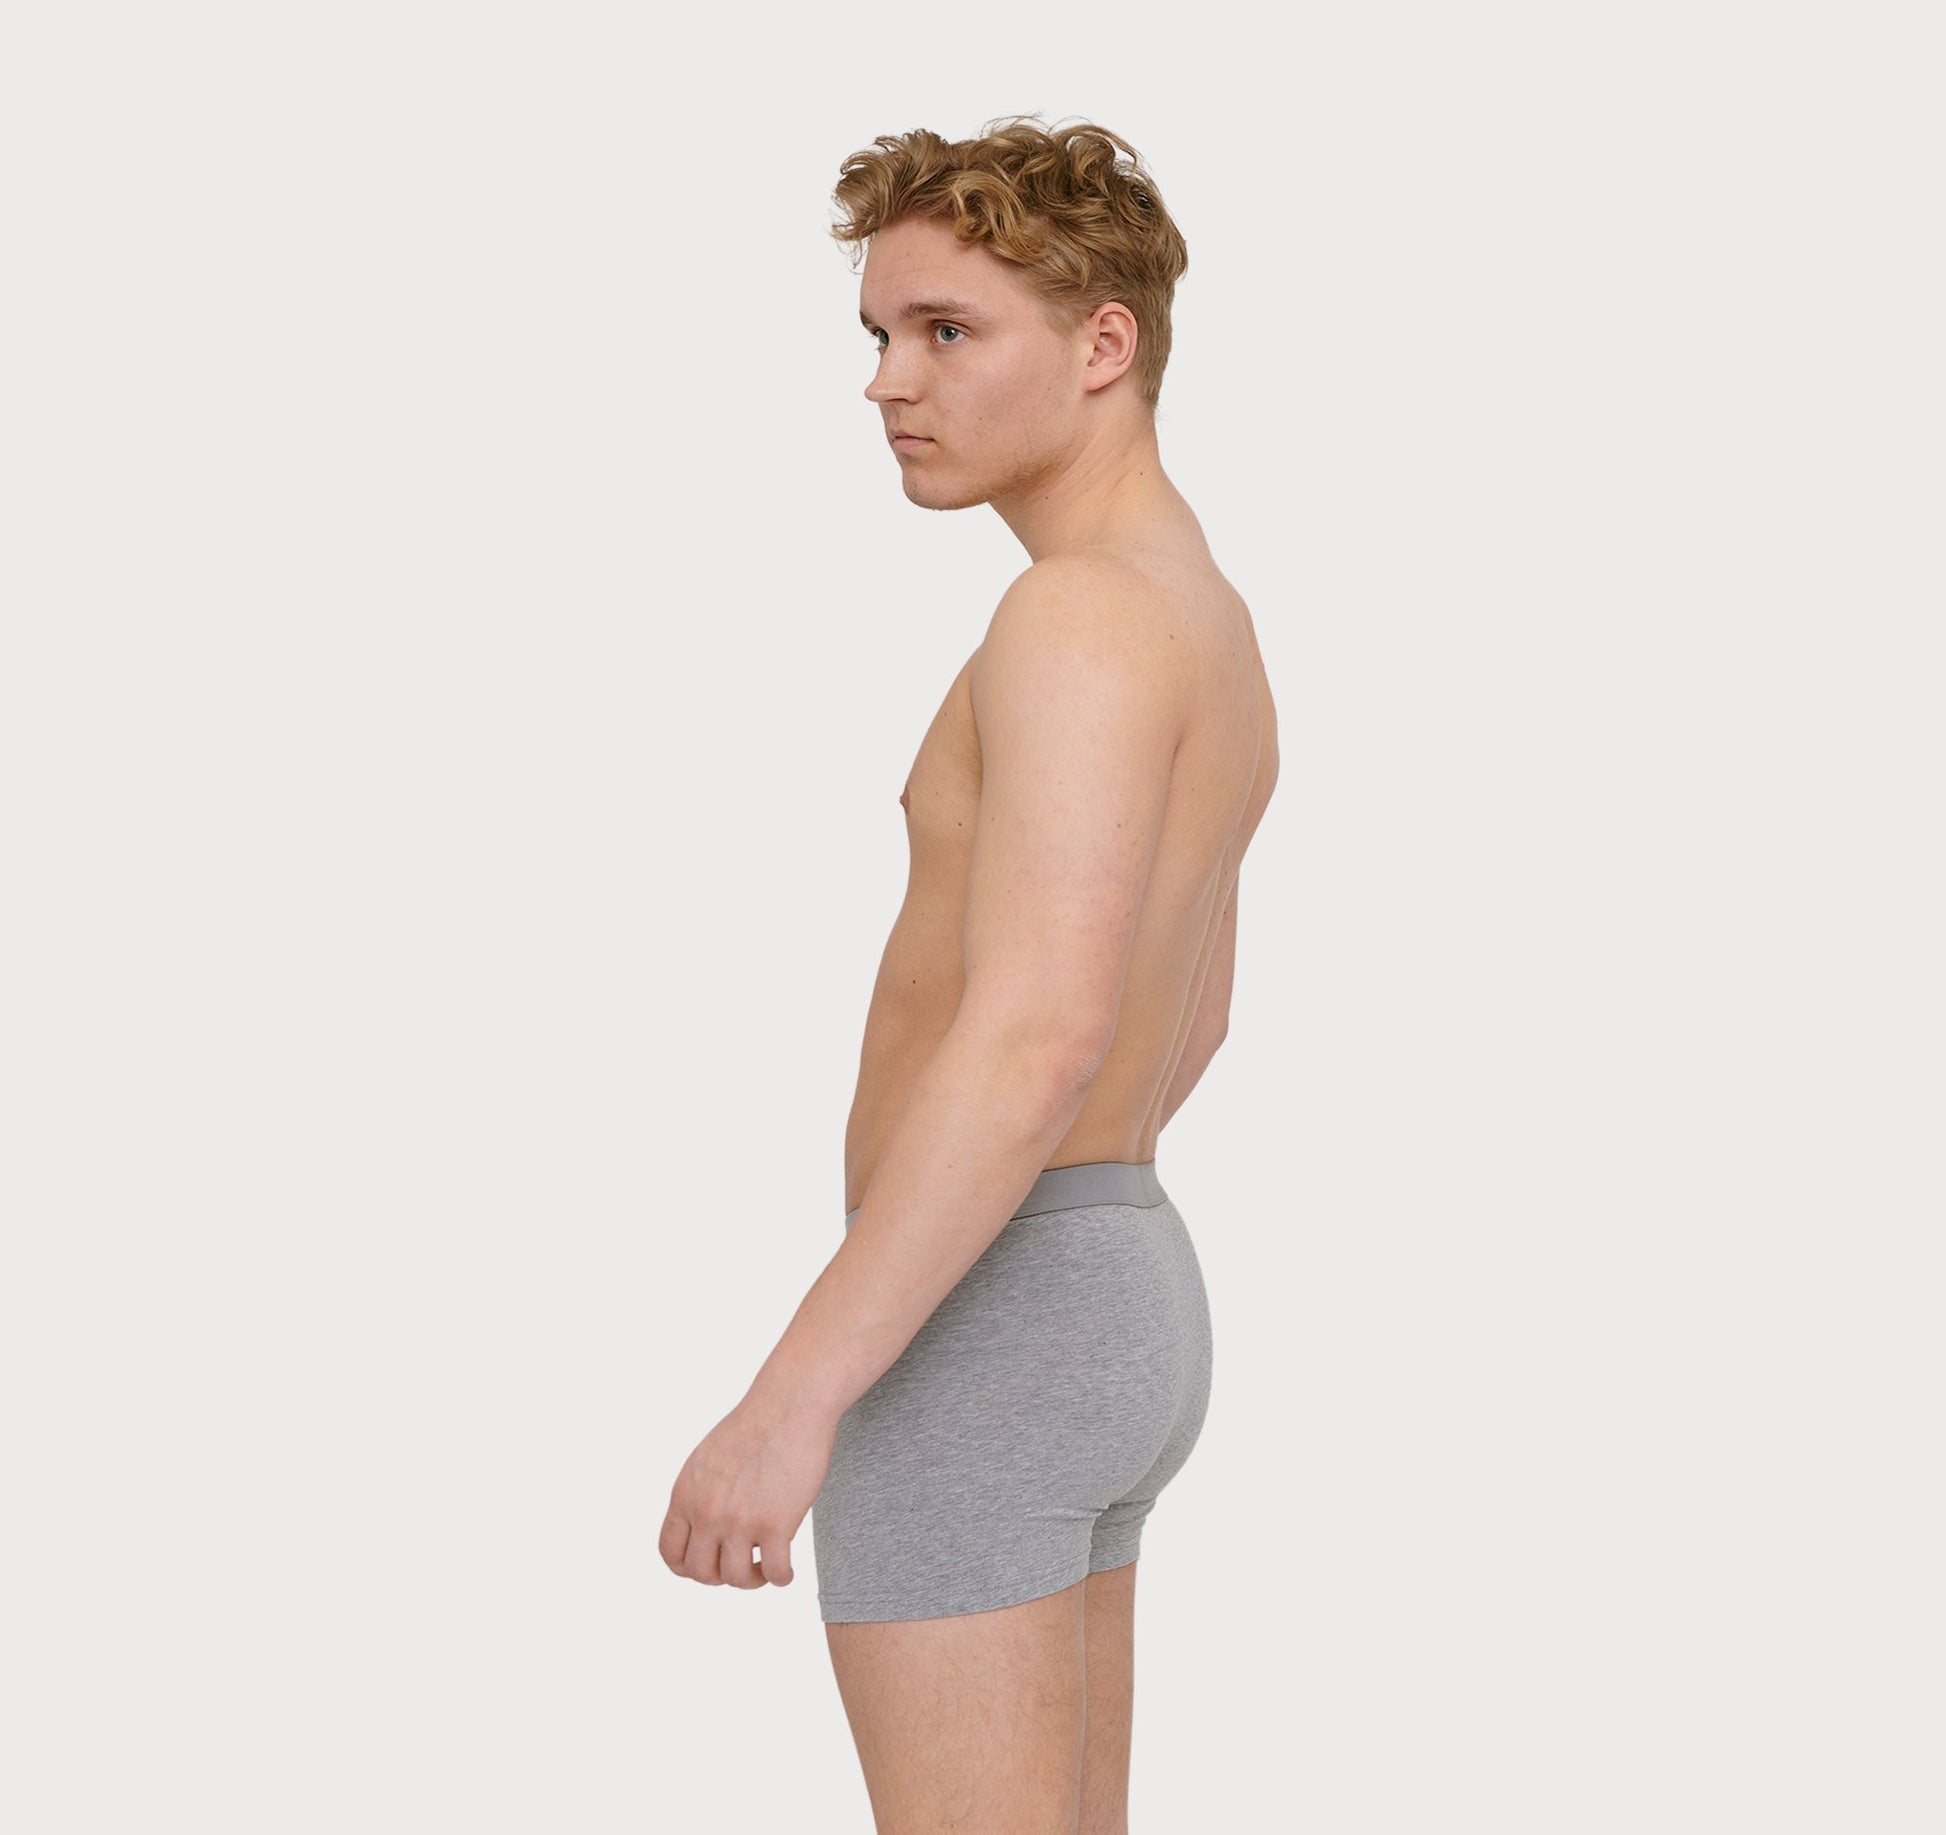 Buy Core Boxers 10-pack, Fast Delivery